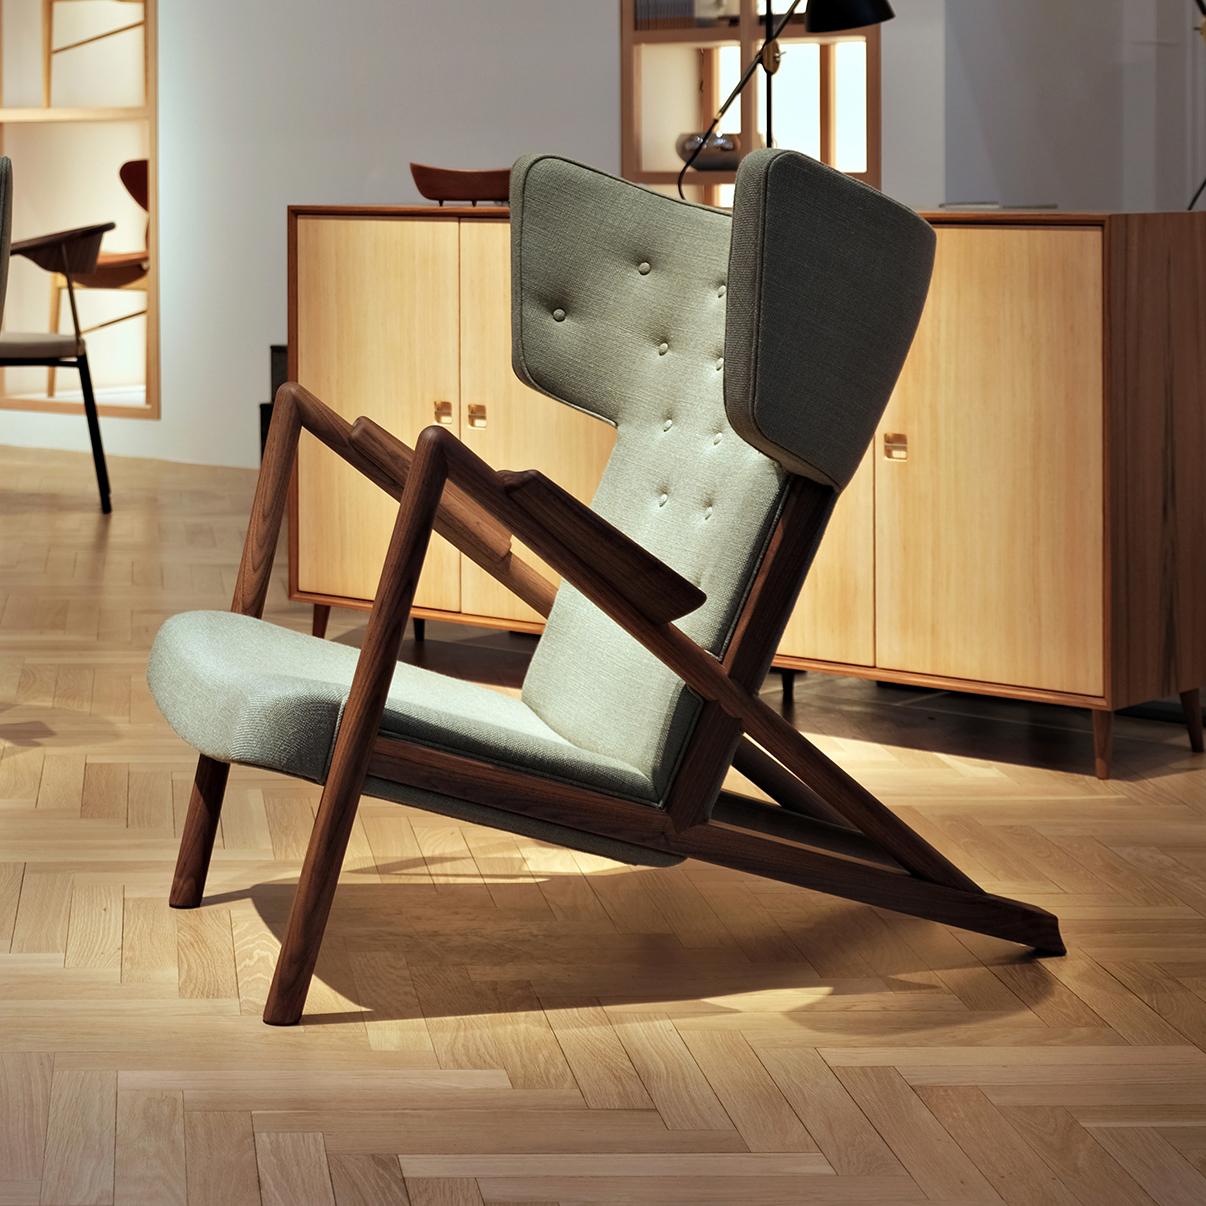 Sofa bench designed by Finn Juhl in 1938, relaunched in 2019.
Manufactured by House of Finn Juhl in Denmark.

The Grasshopper was designed by Finn Juhl in 1938 and exhibited at Niels Vodder's stand at the guild exhibition. Two chairs were